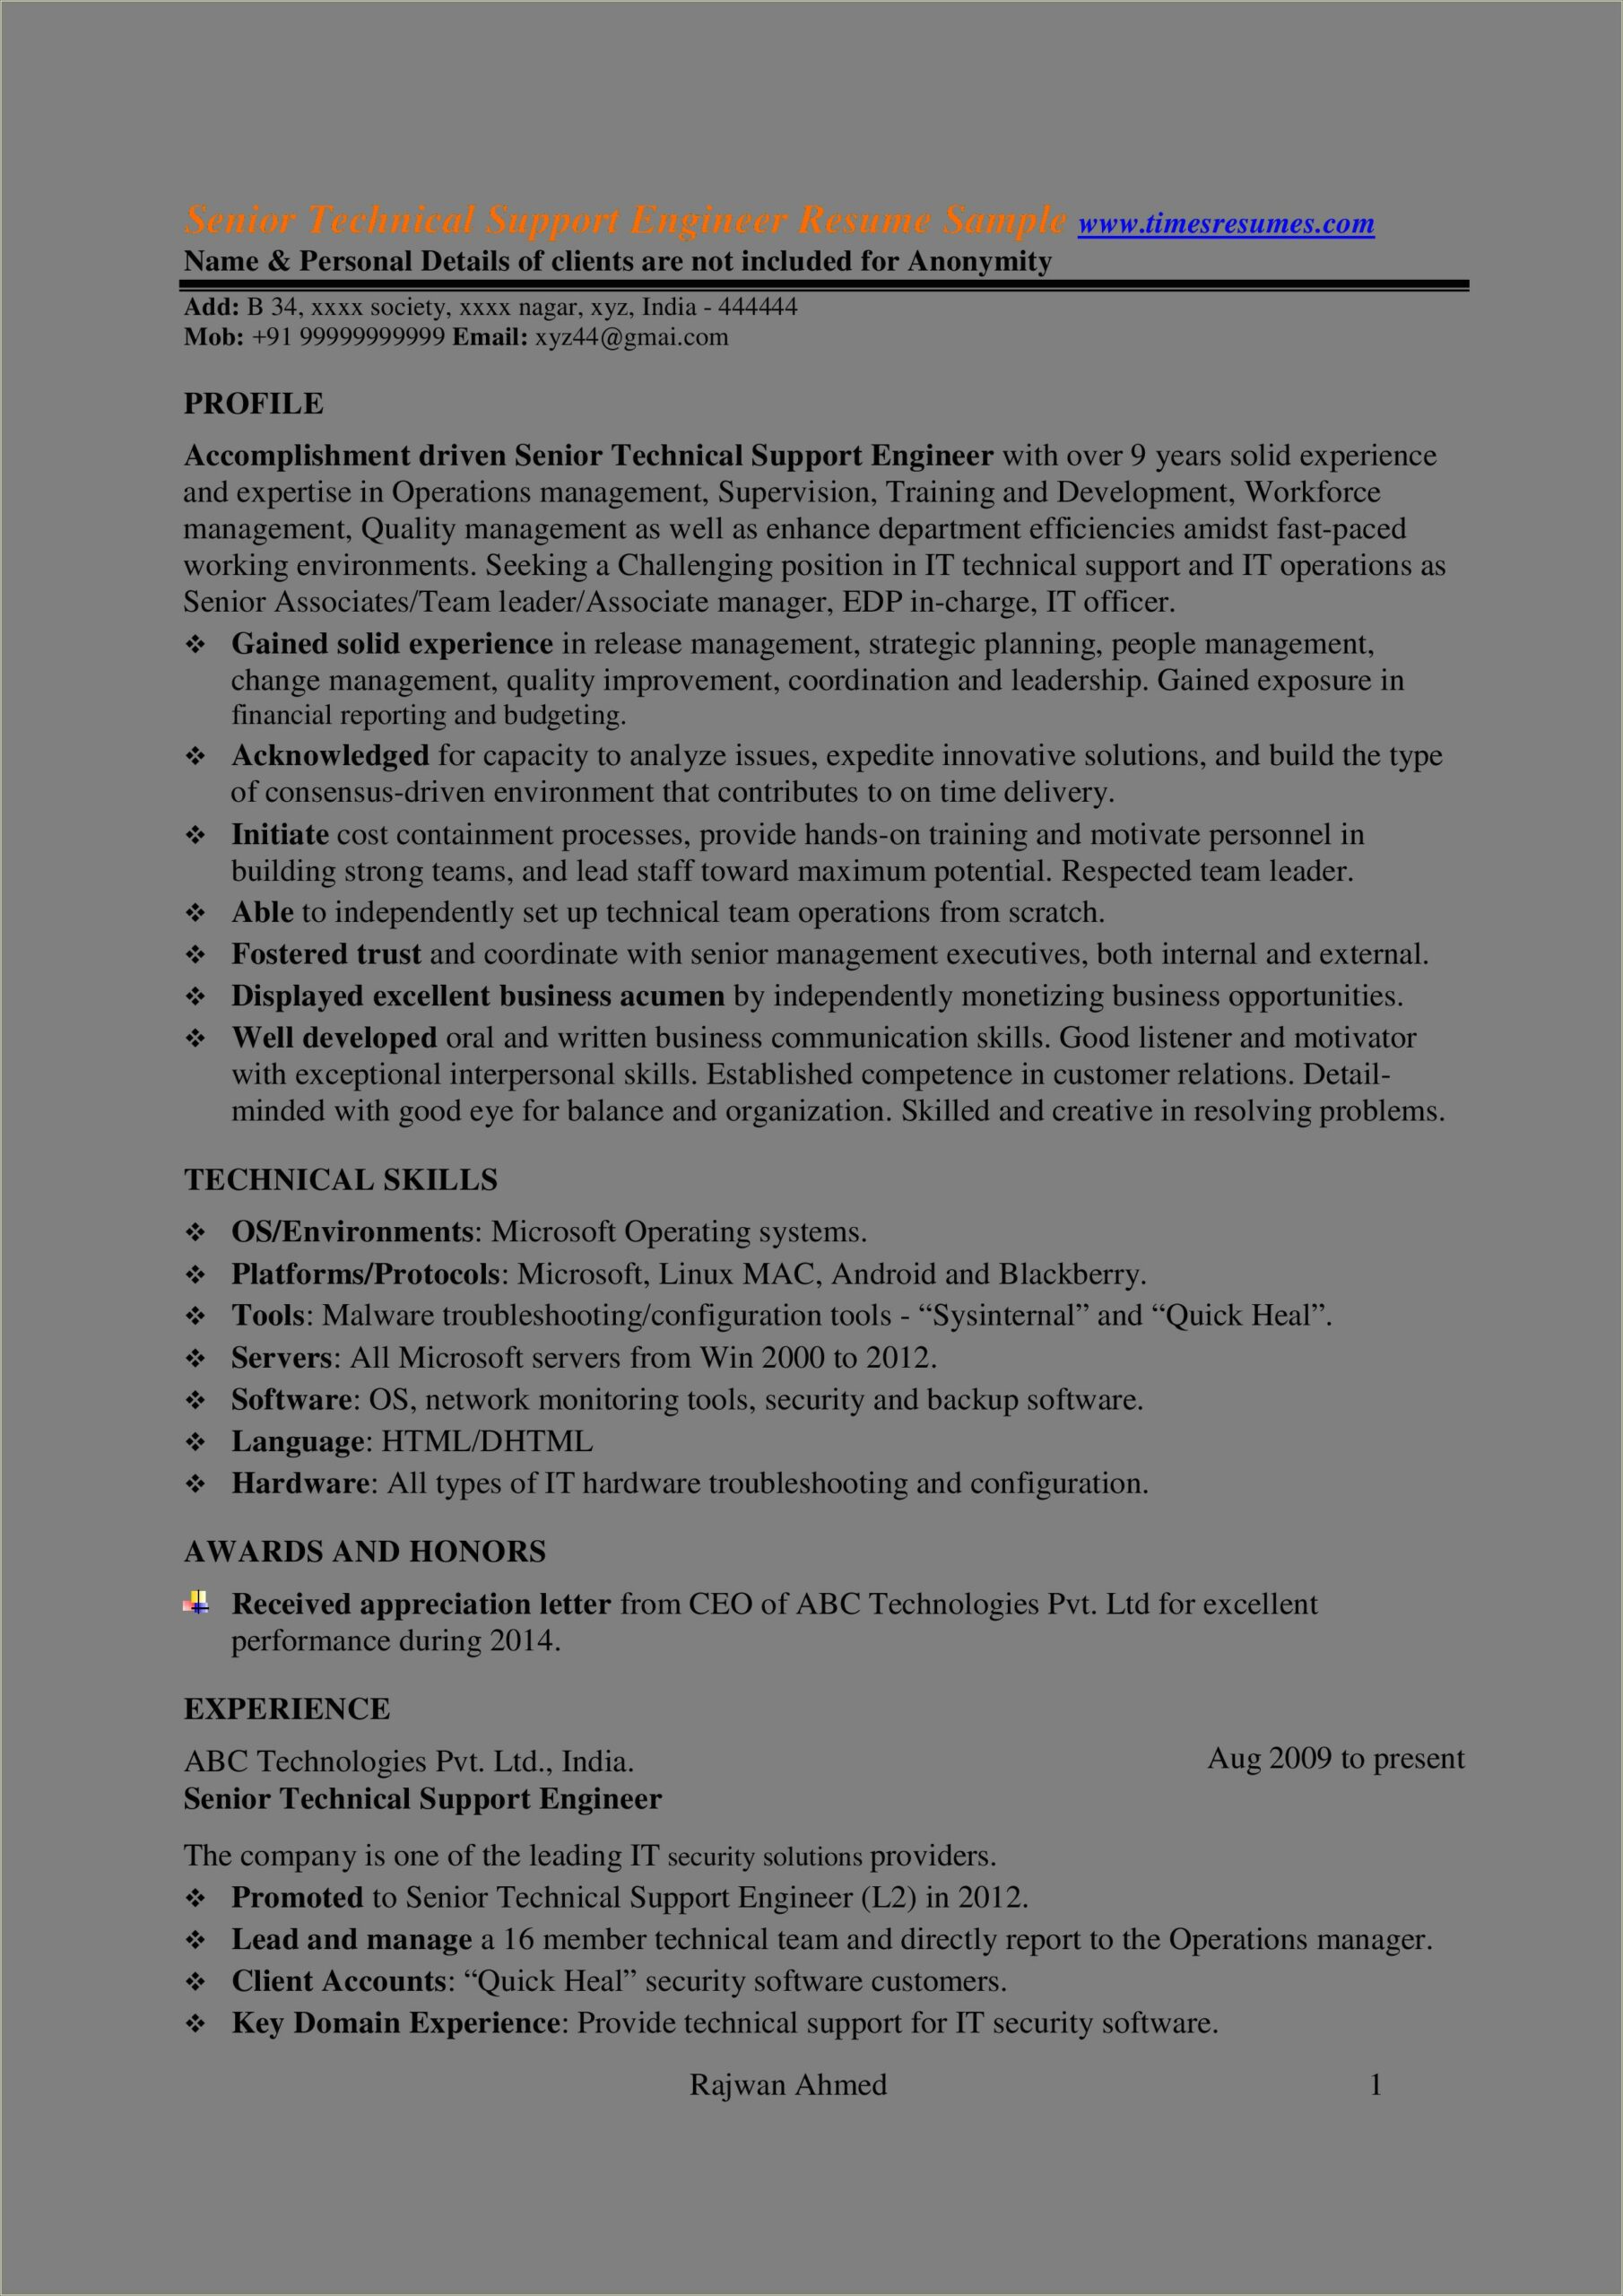 Great Resume Descriptions For Technical Support Engineer